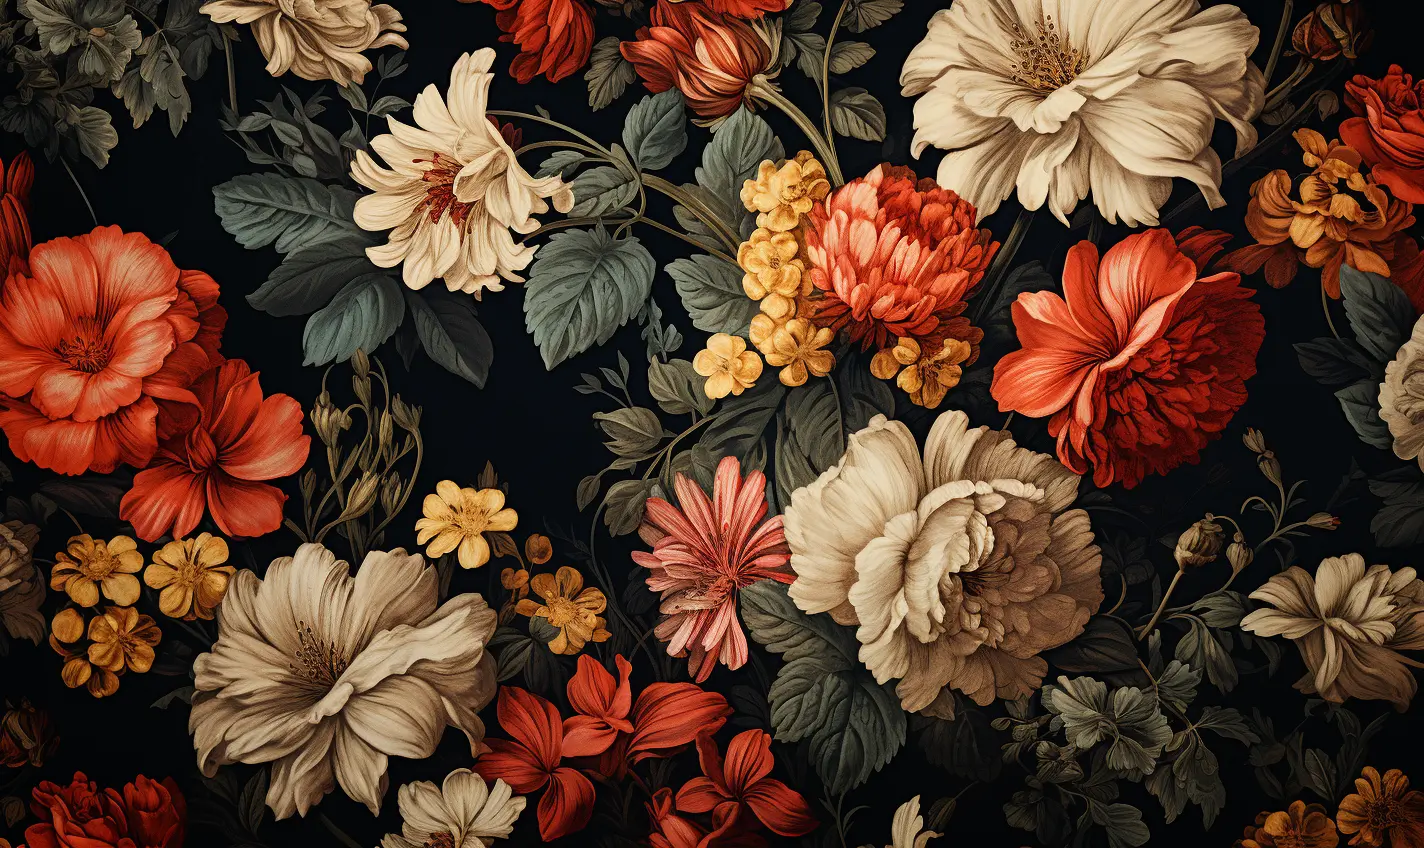 amitm Fabric texture with flowers pattern perspective high qua b92416ca e694 4f83 aebf ed4076ee1a3d pattern design